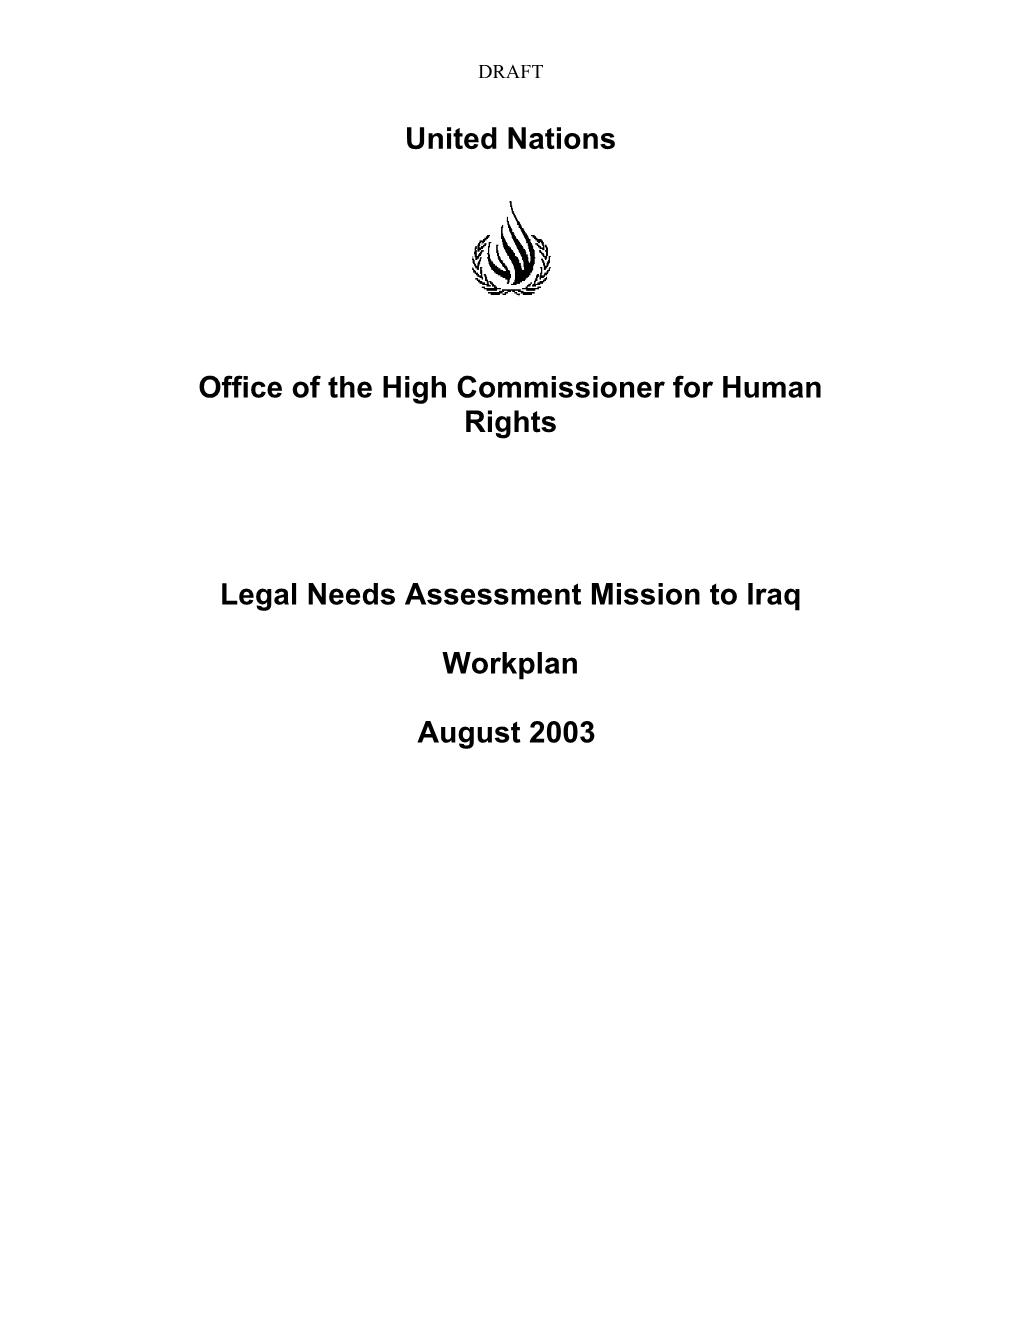 Legal Needs Assessment Mission to Iraq